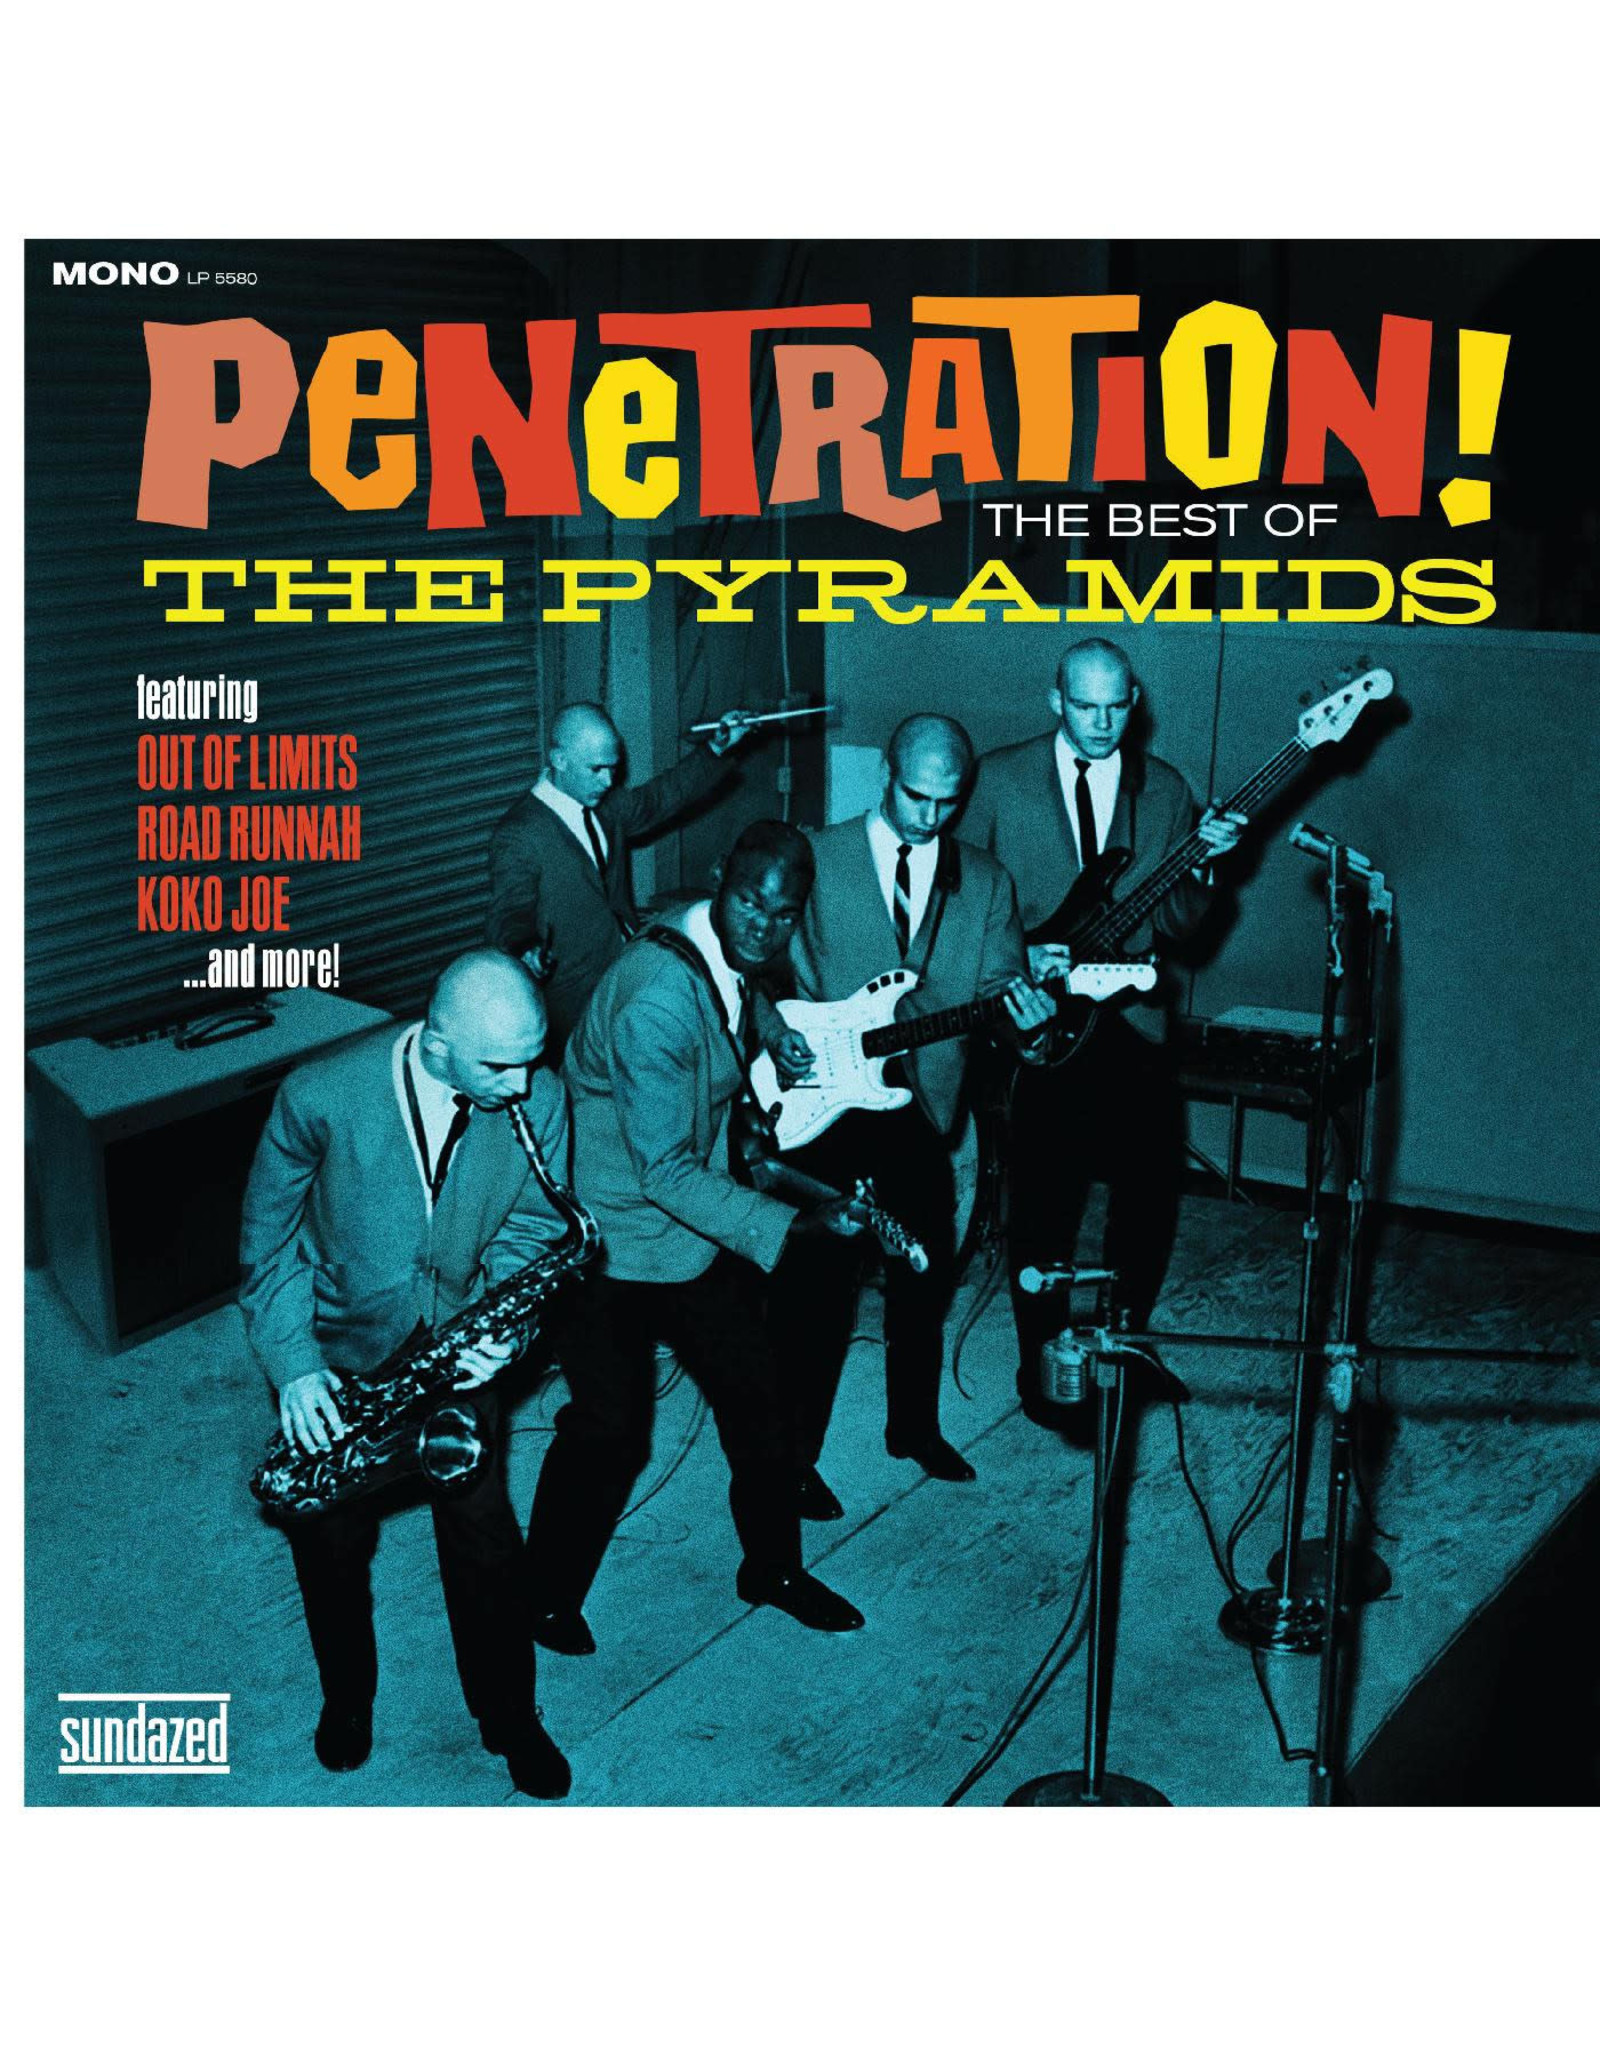 Sundazed Pyramids, The: Penetration! The Best Of The Pyramids (TURQUOISE) LP